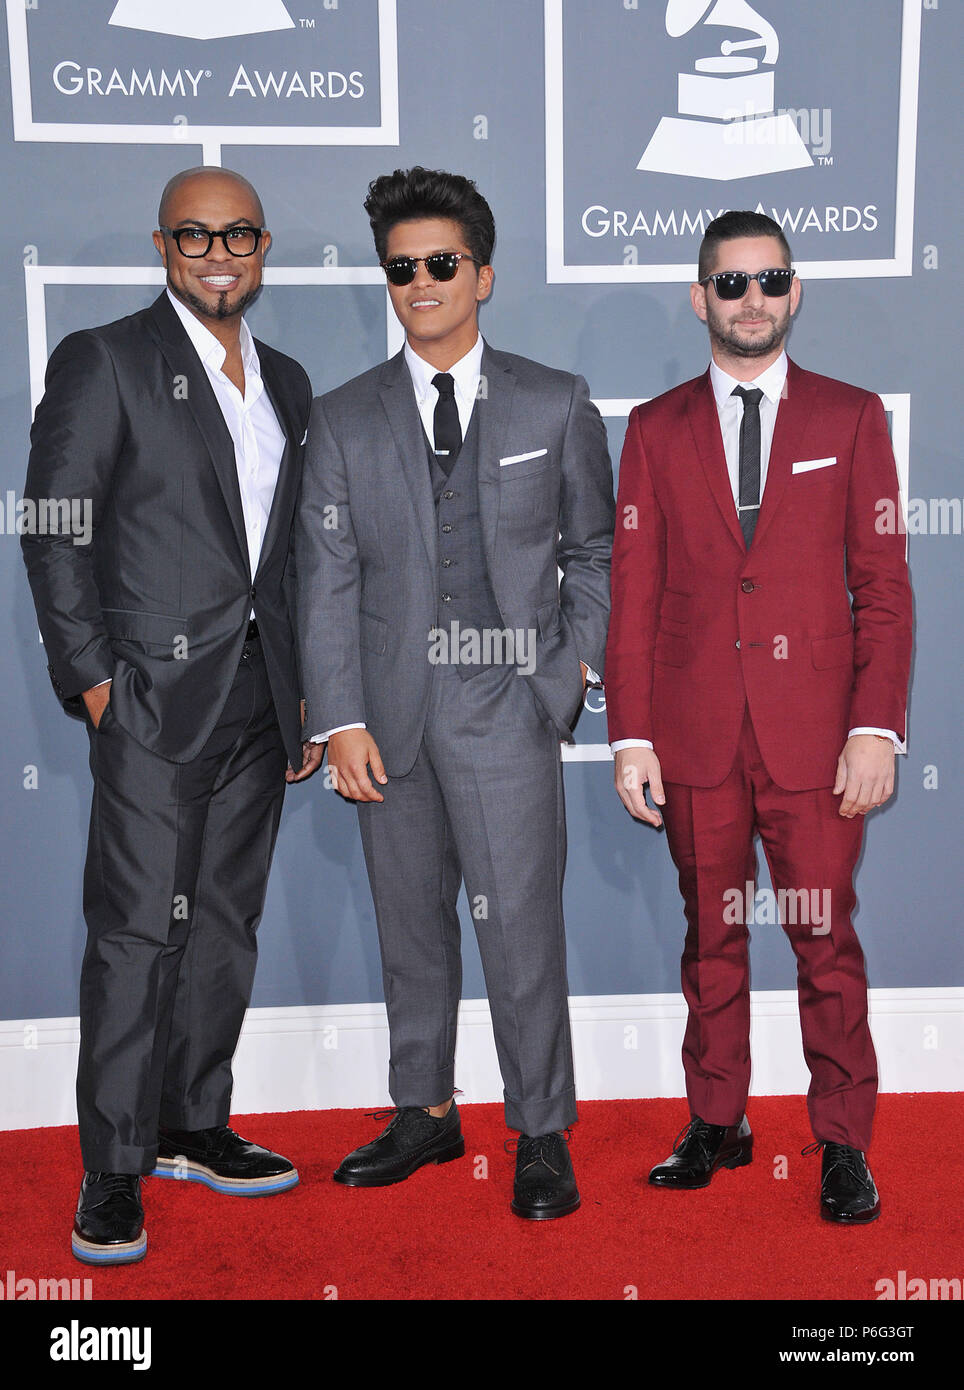 Bruno Mars and the Smeezingtons 138 at The 54th Annual GRAMMY Awards 2012  at the Staples Center In Los Angeles.Bruno Mars and the Smeezingtons 138  Event in Hollywood Life - California, Red